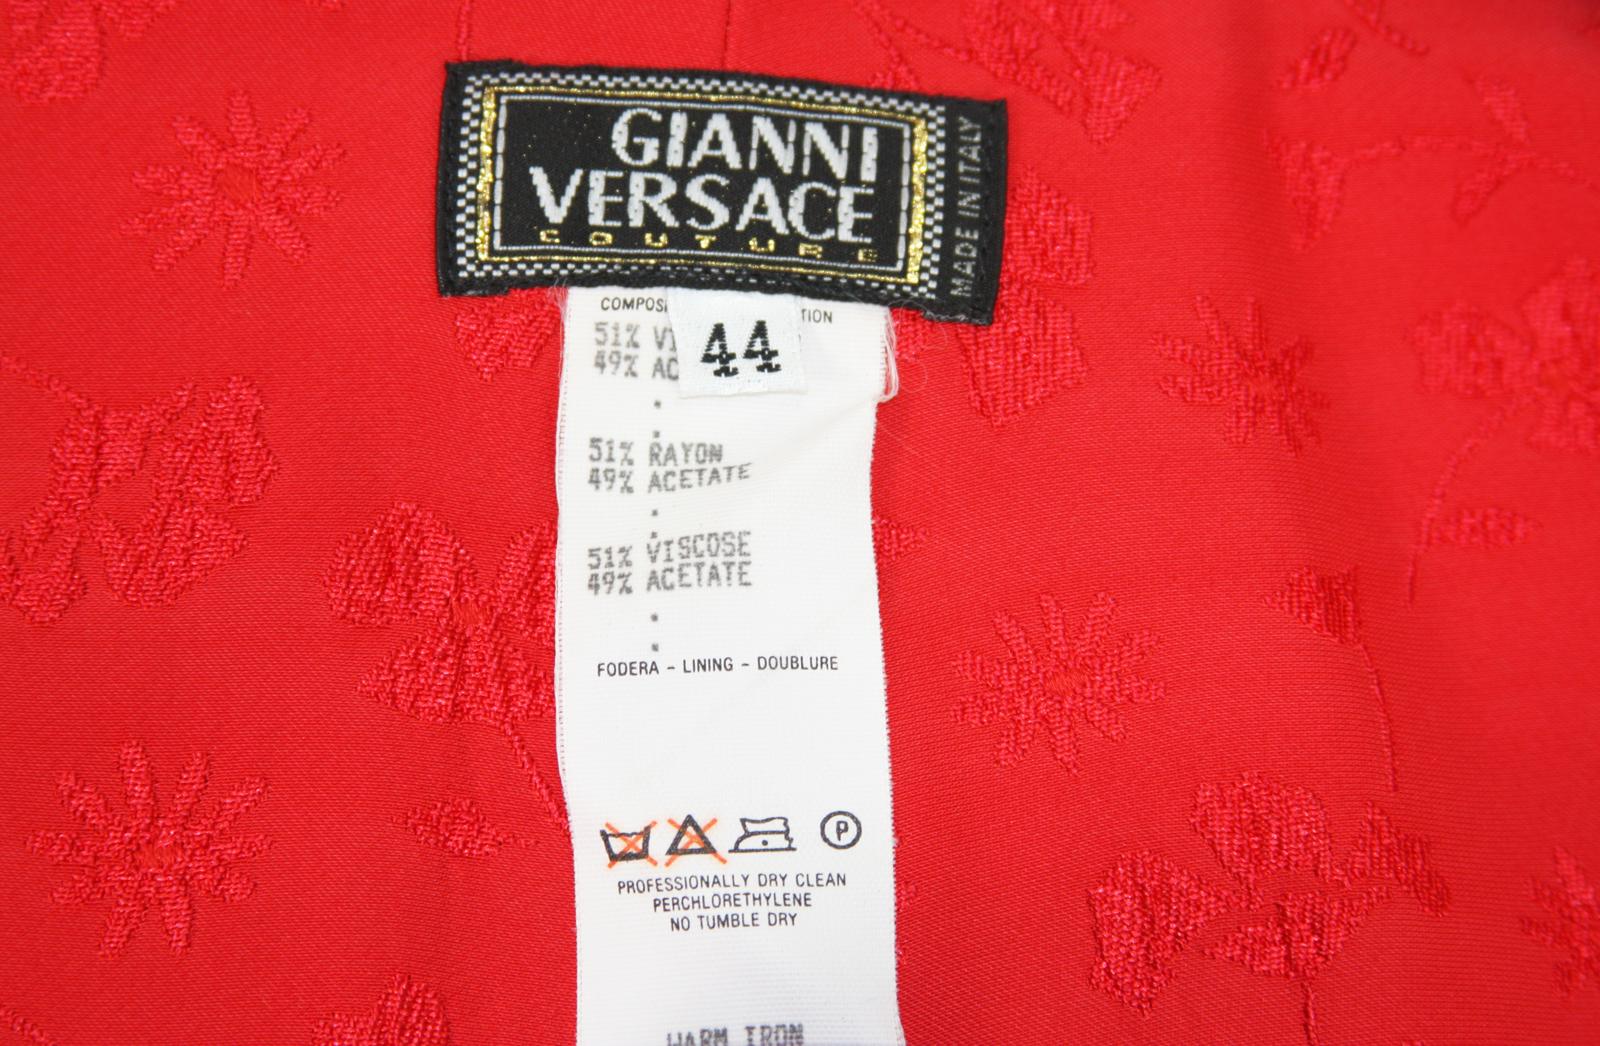 Gianni Versace Couture S/S 1998 Collection Black and Red Open Back Dress Gown  For Sale 7